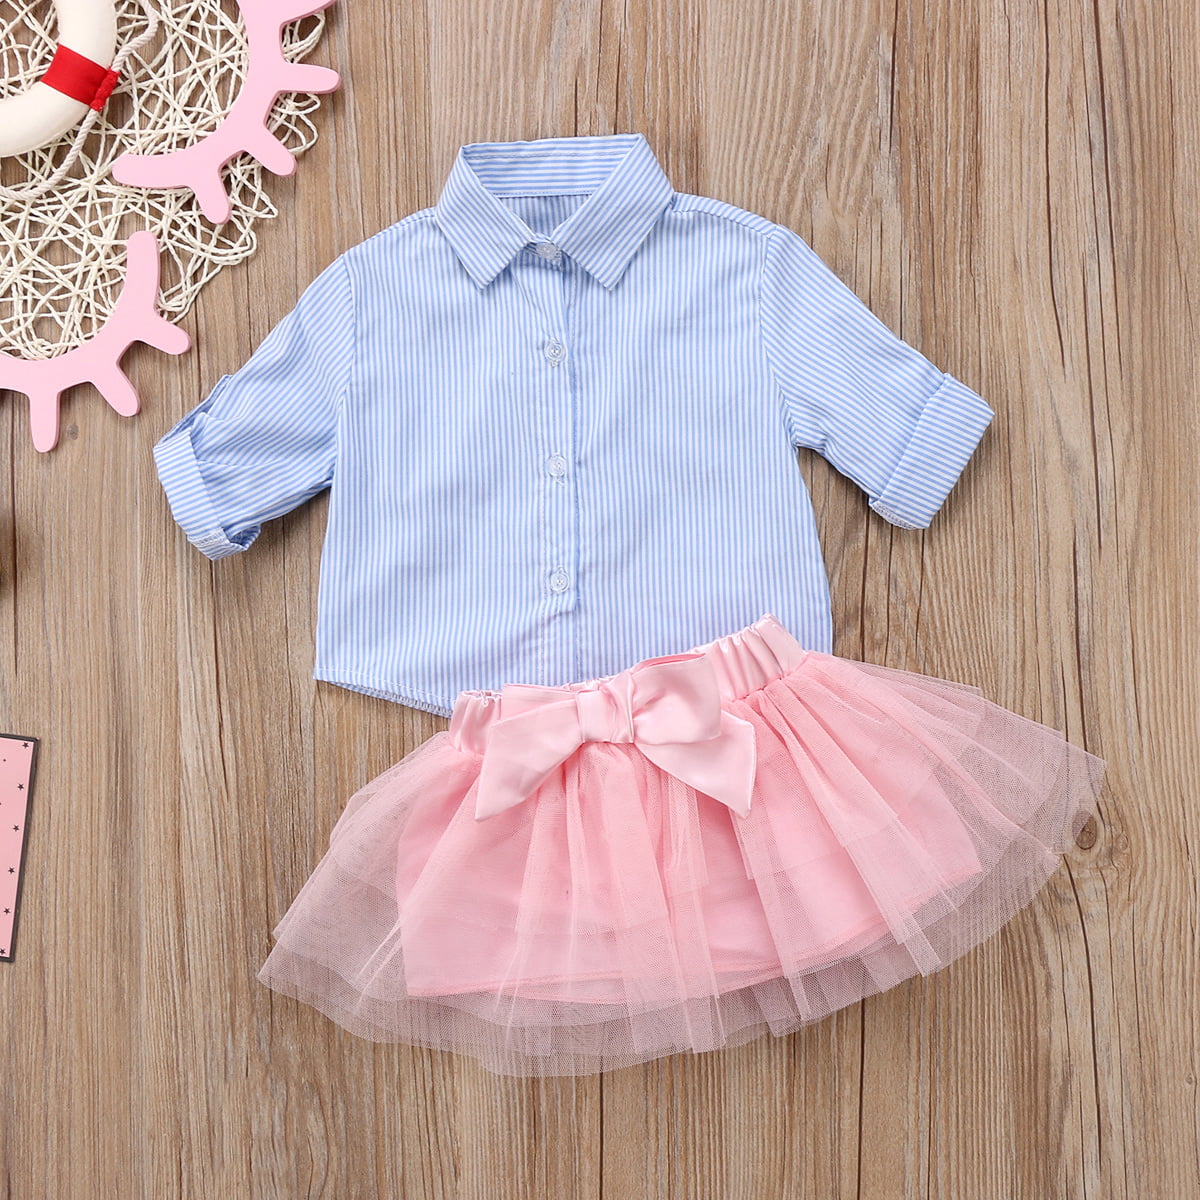 2pcs Baby Girl Kid Ruffled Sleeve Striped T-Shirt+Tulle Tutu Bow Skirt Set Outfits Clothes 